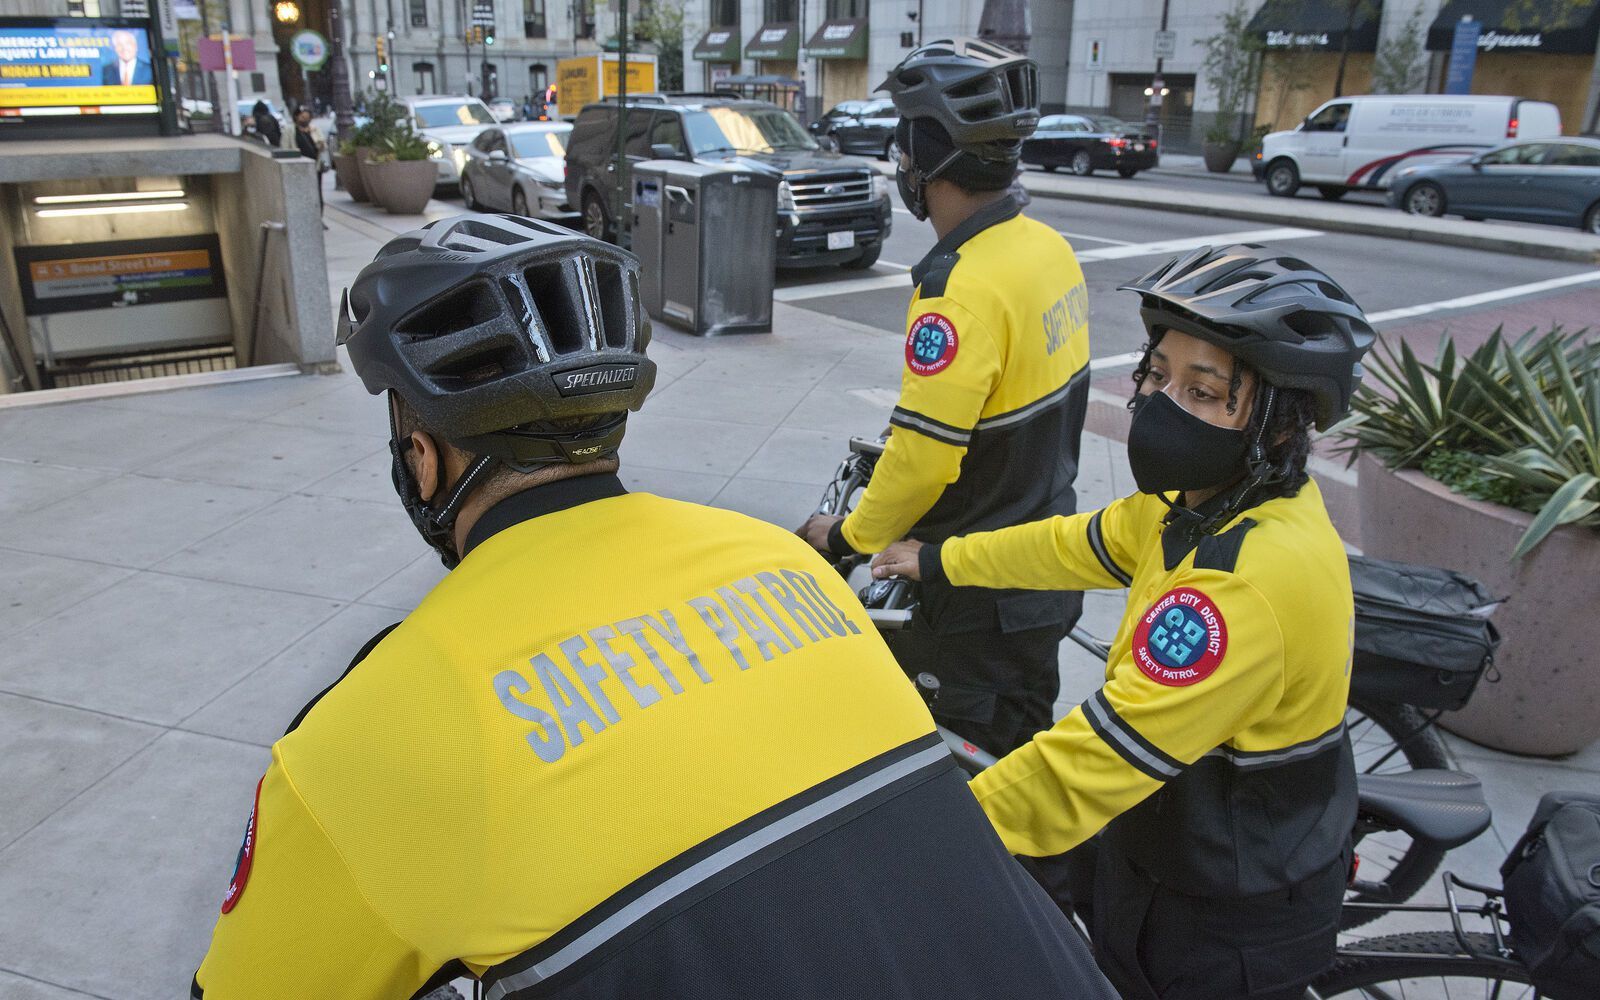 Center City safety: More unarmed bike patrols, security guards as office workers return